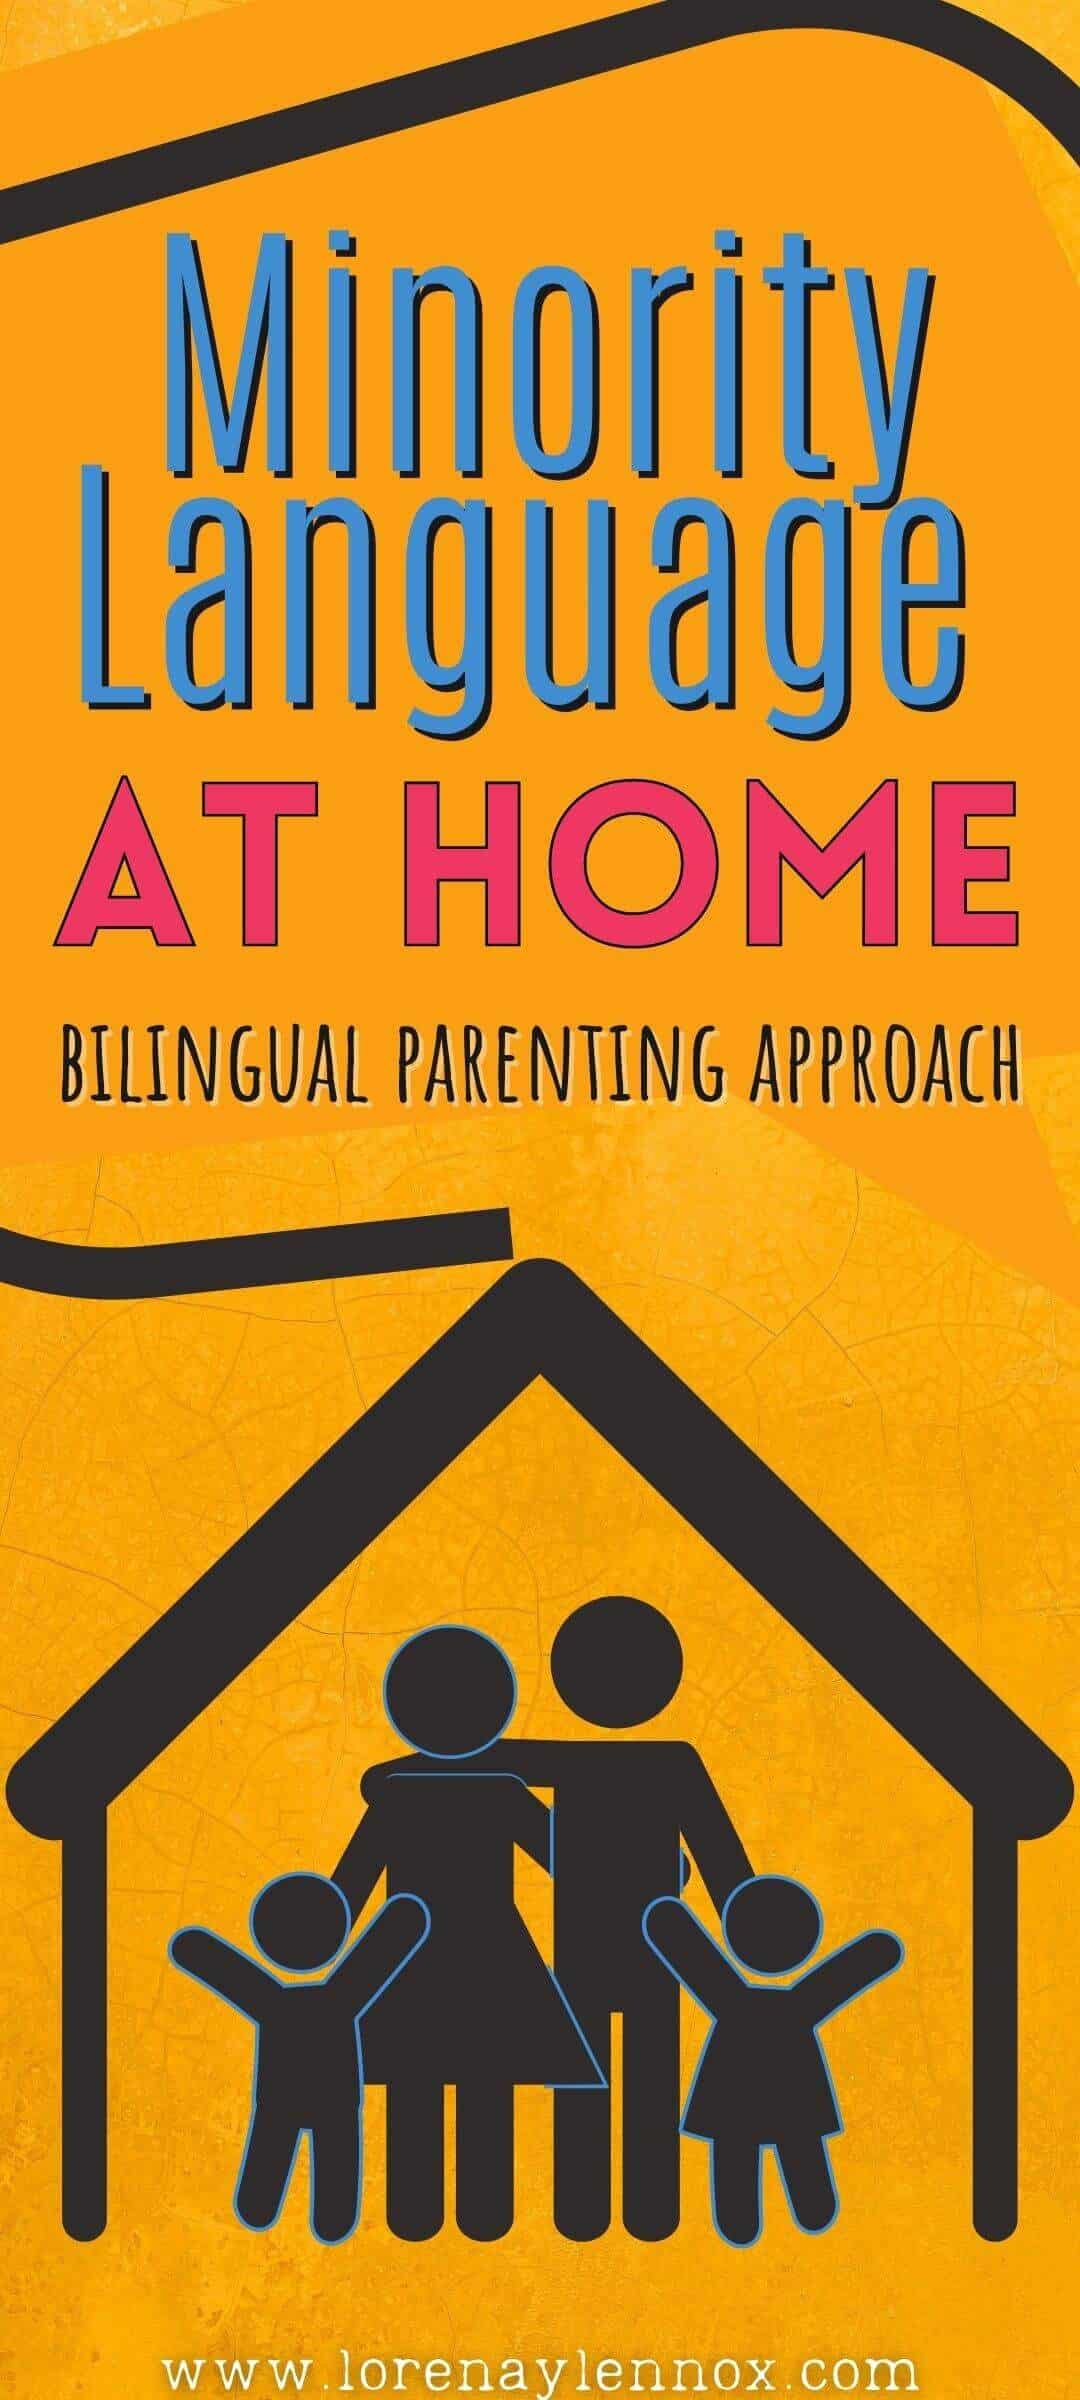 Minority Languge at Home Bilingual Parenting Approach